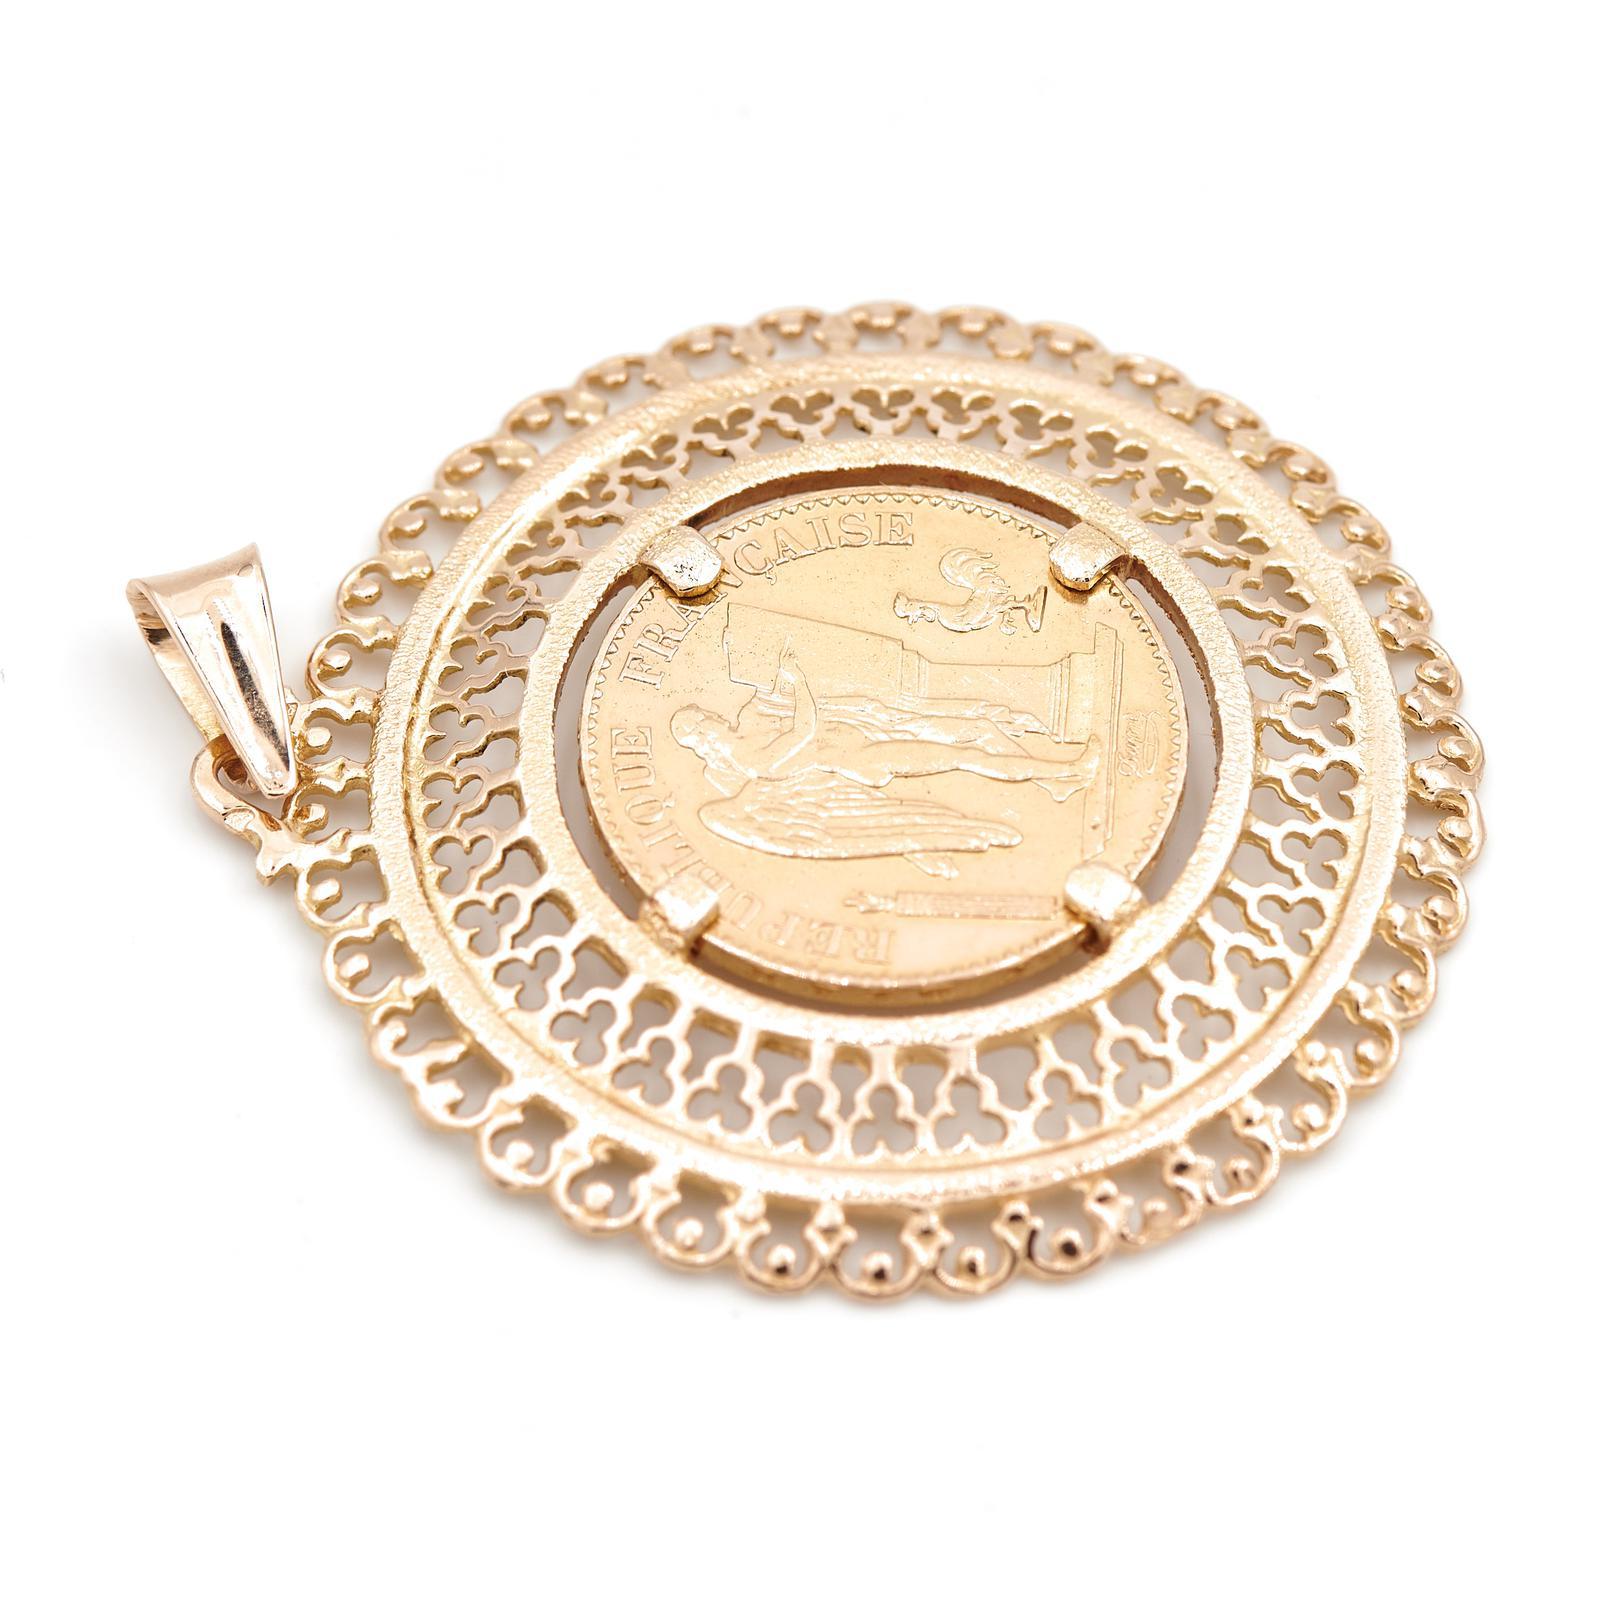 Pendant in gold 750 thousandths (18 carats). with a coin of 20 francs in yellow gold 900 thousandths (21.6 carats). Weight of the coin: 6.45 g. Length: 5.15 cm. Width: 4.15 cm. Total weight: 14.74 g. Marked head of eagle. Excellent condition
